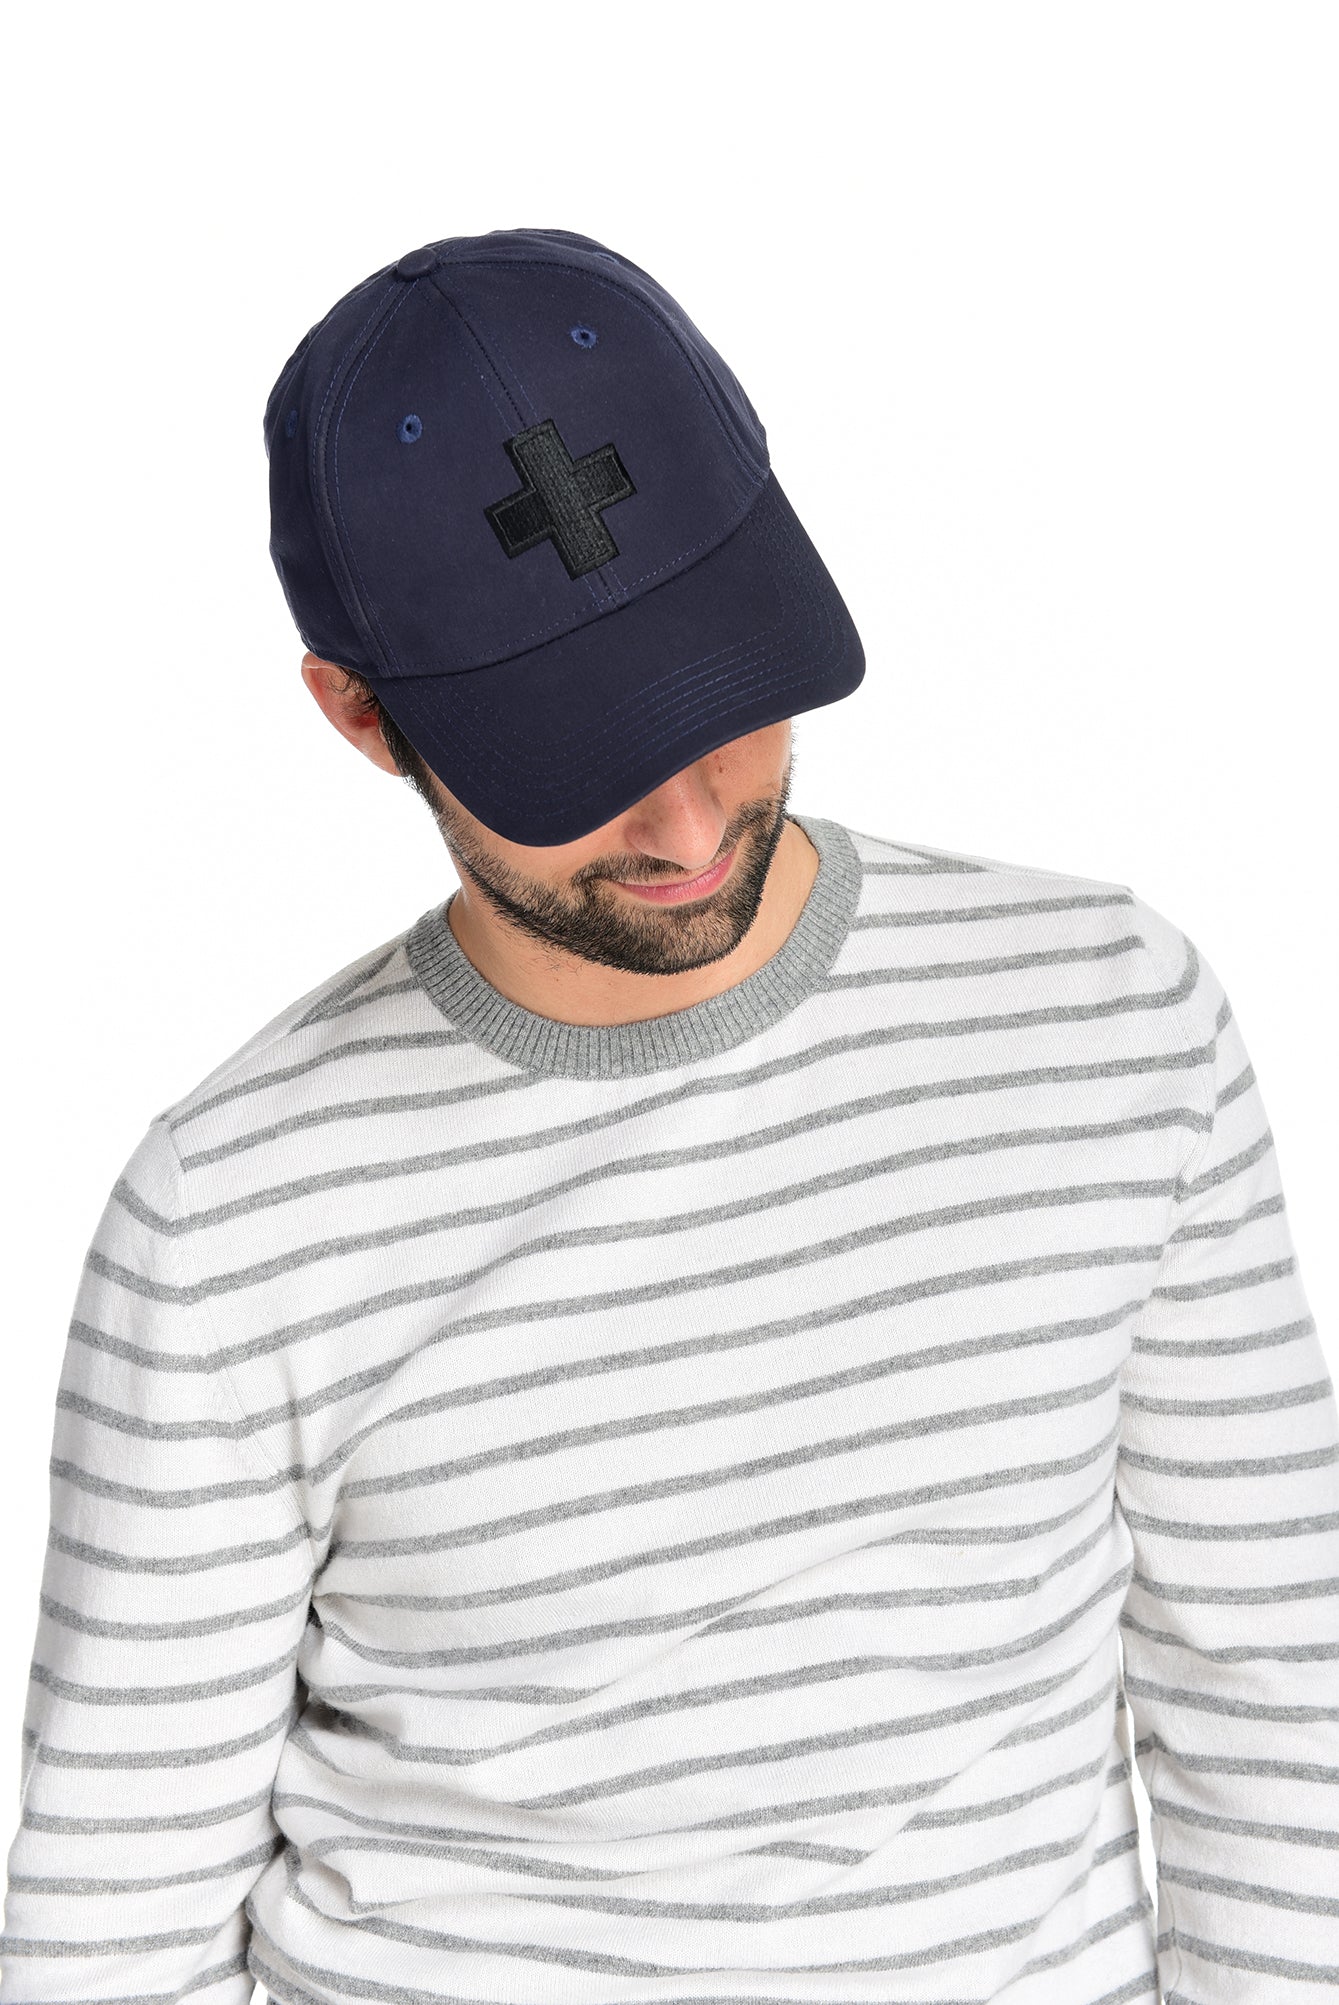 Fisher + Baker Men's Ventile Ball Cap made from soft waterproof